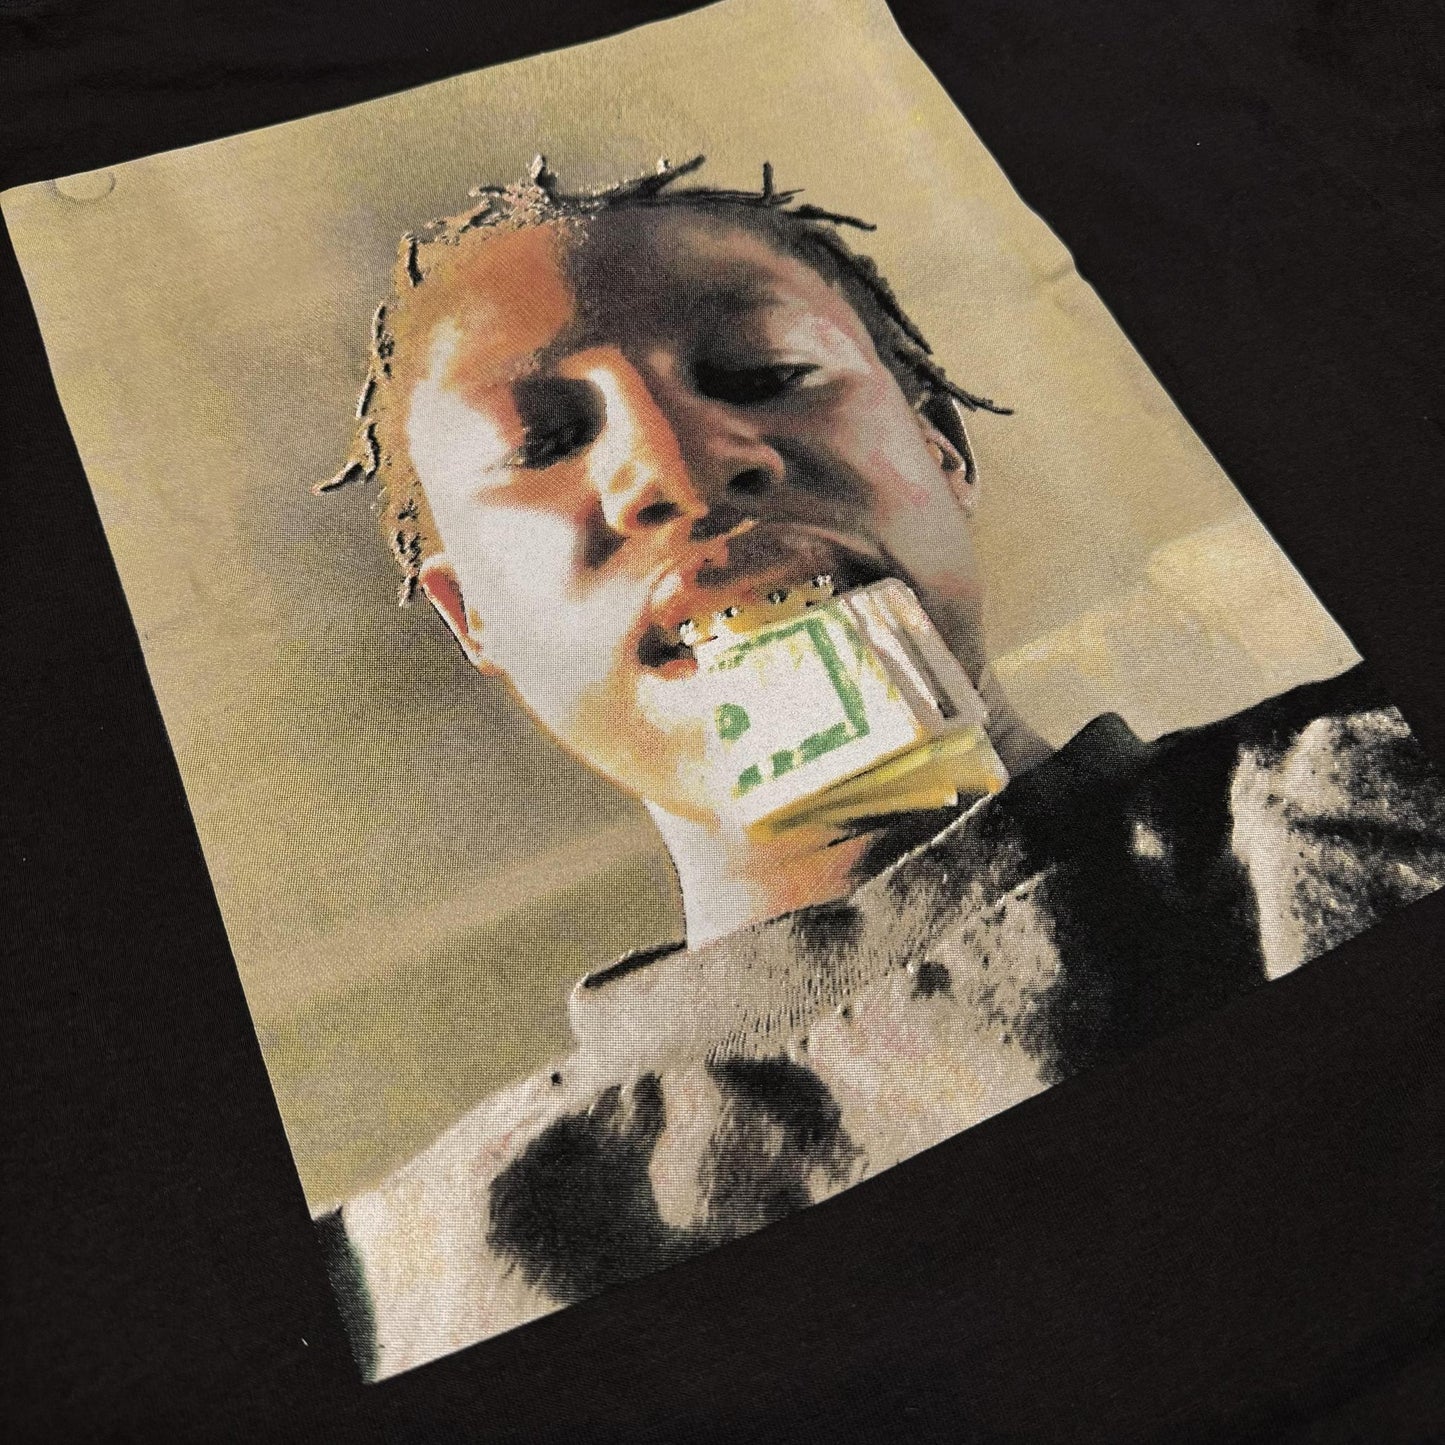 Kader "Put Your Money Where Your Mouth Is" Tee